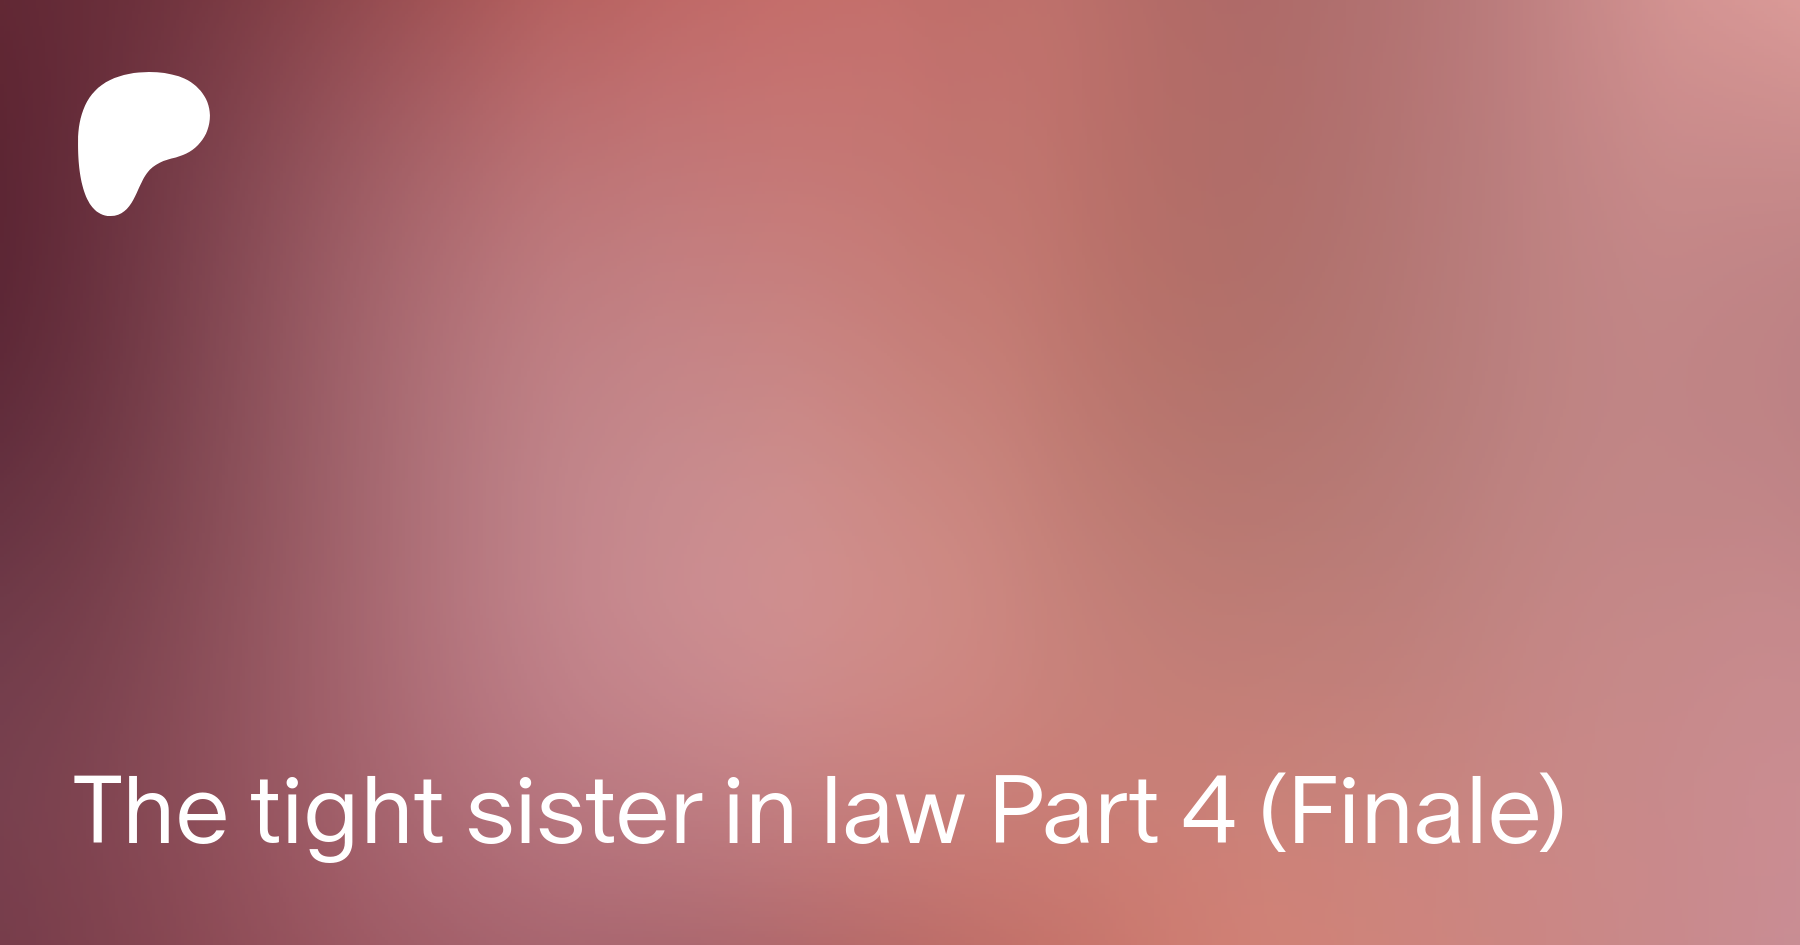 The tight sister in law Part 4 (Finale)